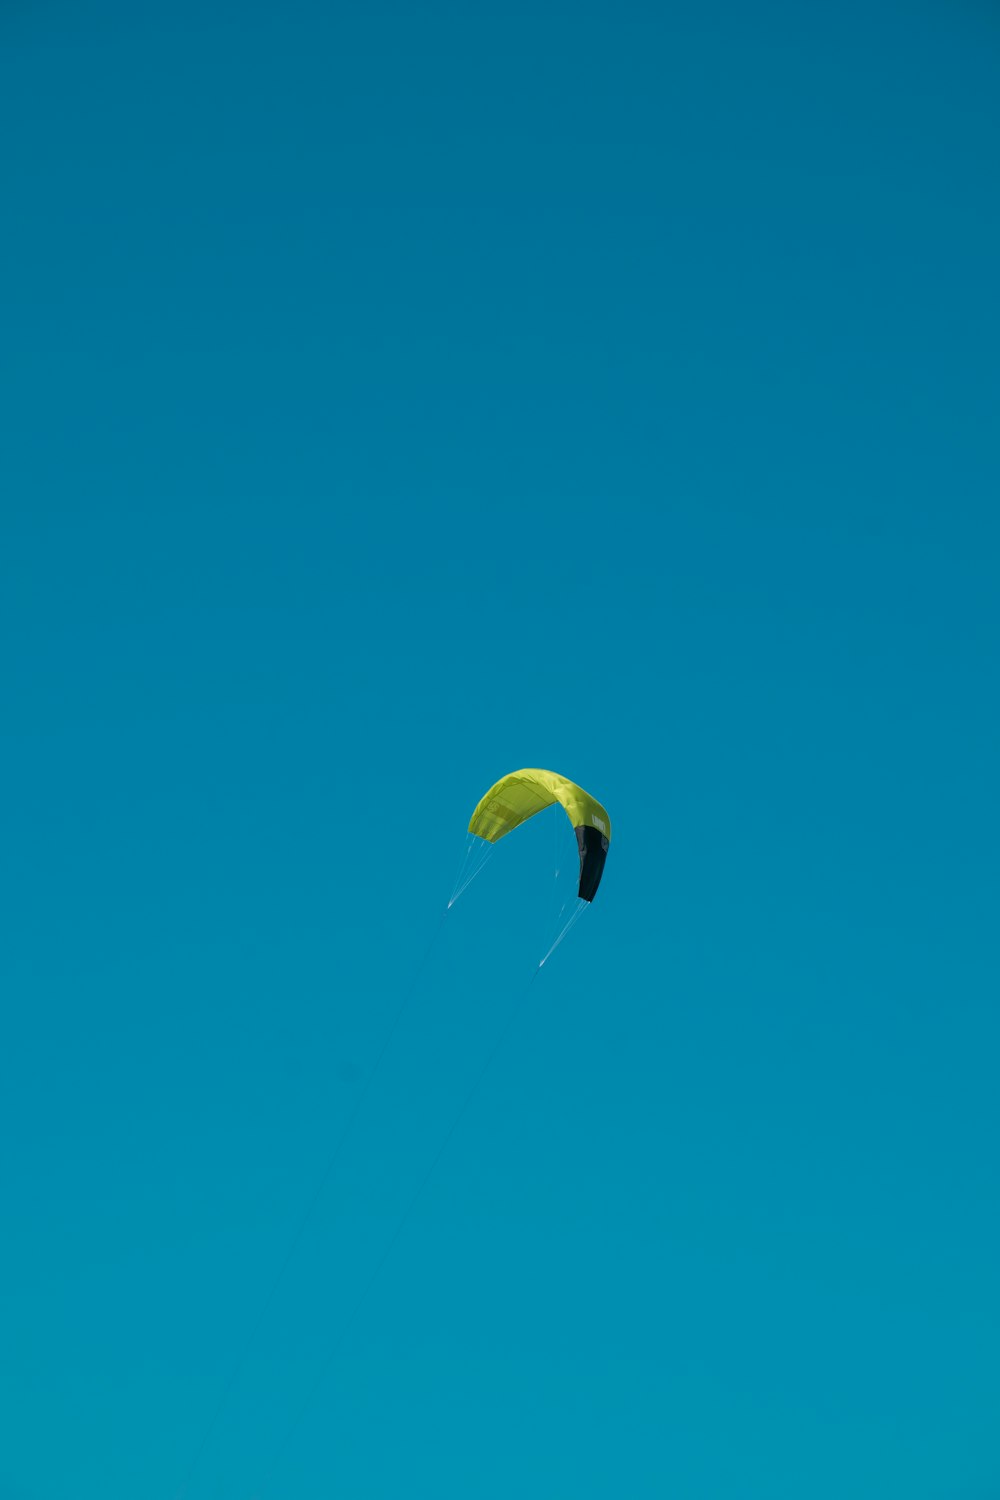 a kite is flying high in the blue sky